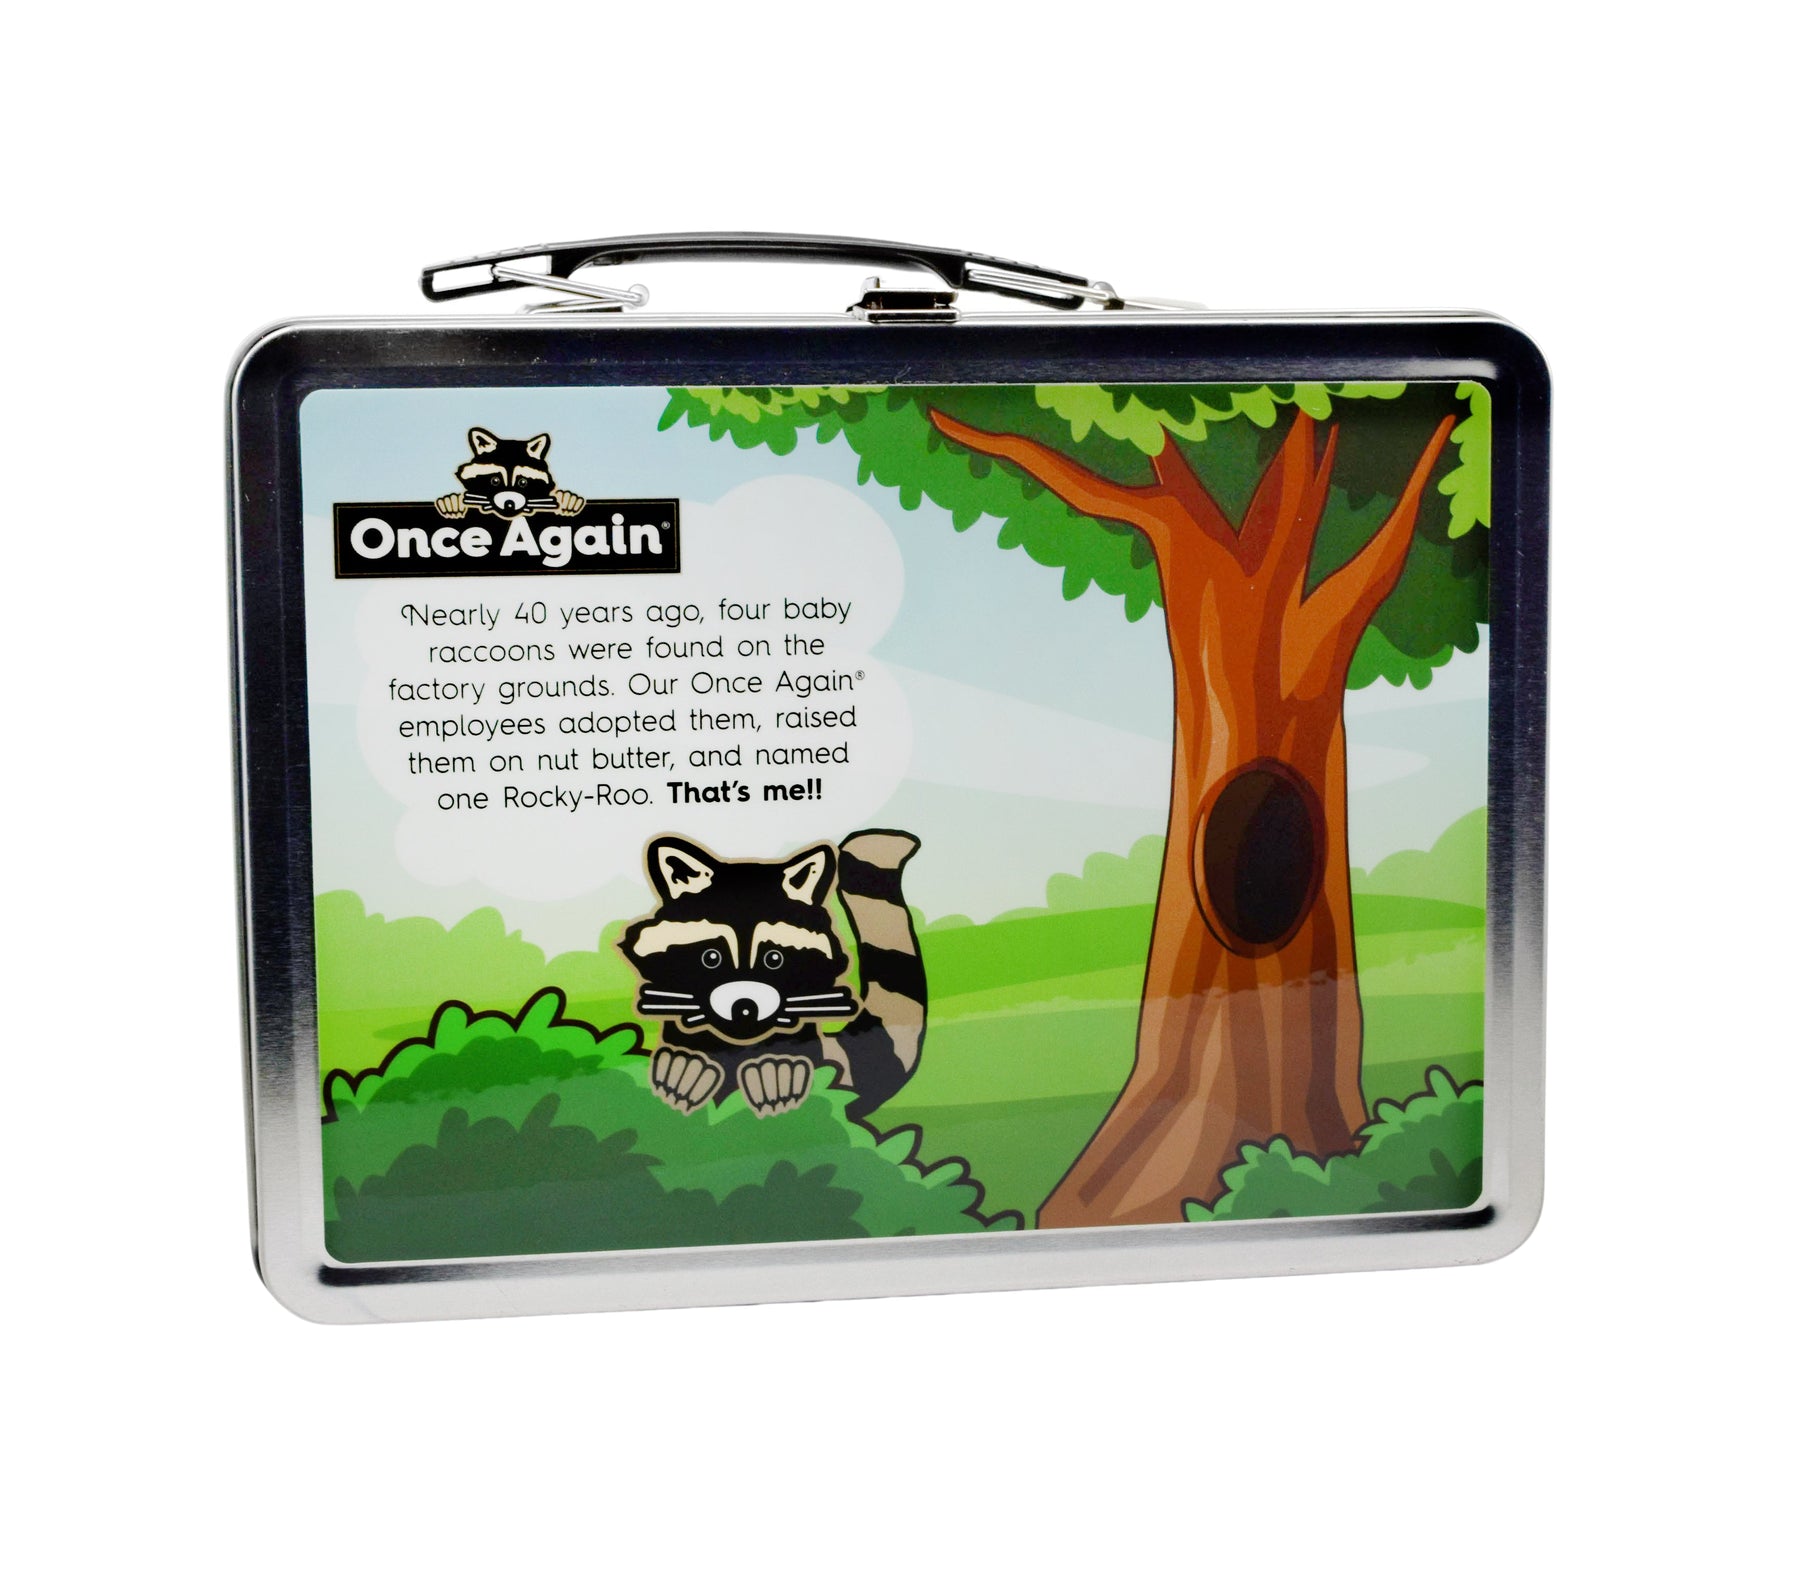 Wormy Apples Game in Metal Lunchbox Complete Ages 4 Fundex 2-4 Players for  sale online